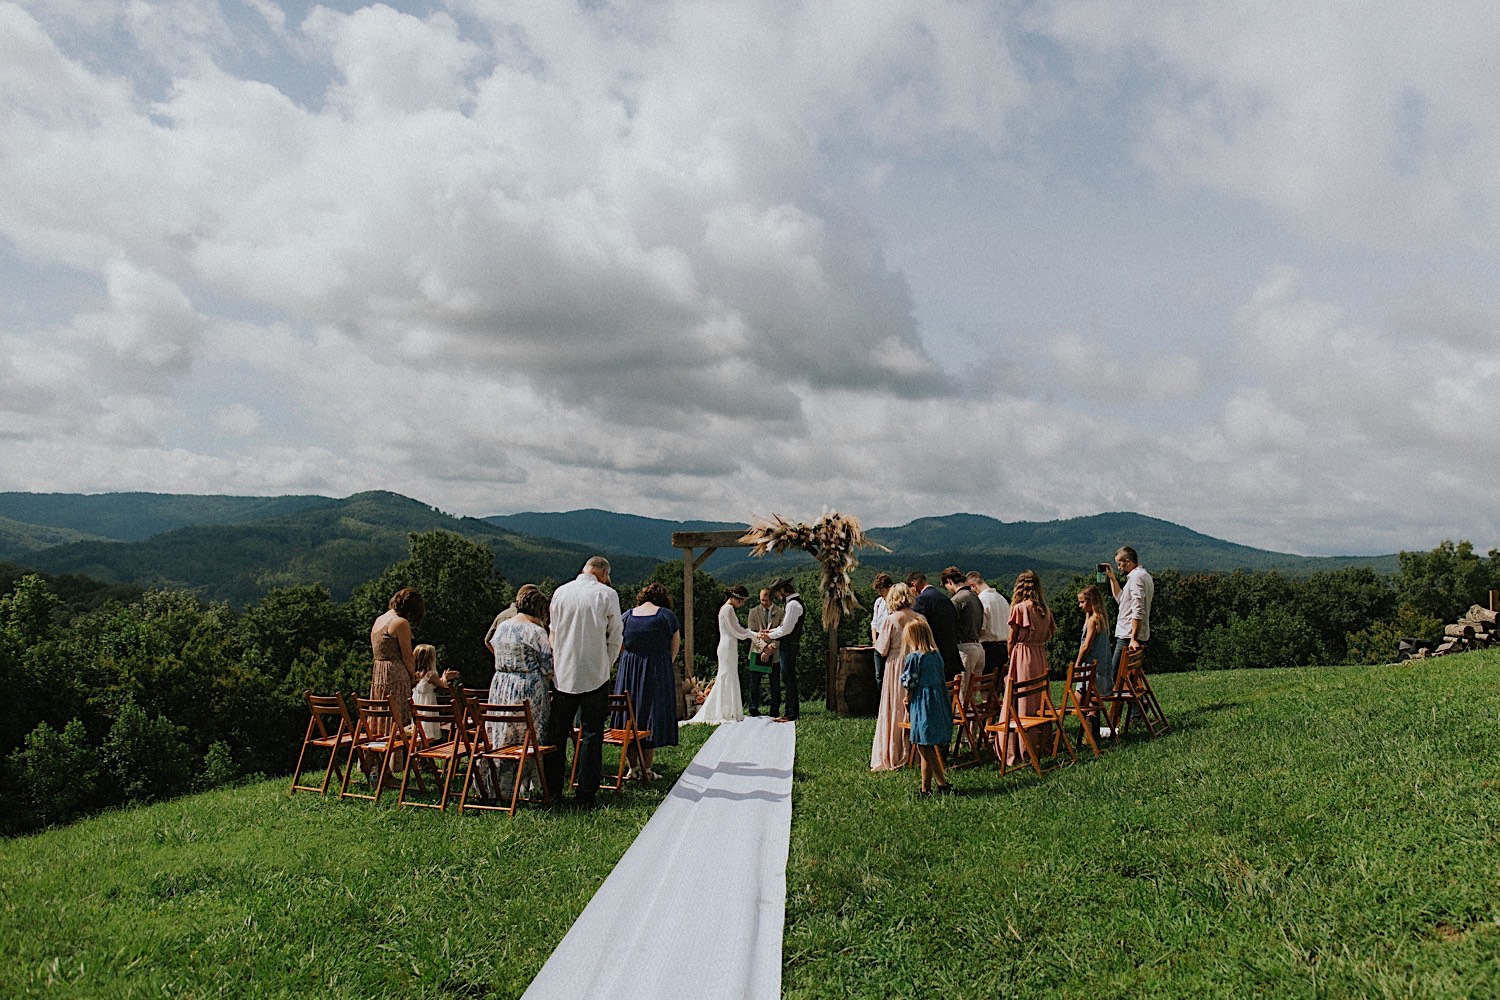 A bride and groom hold hands during their elopement ceremony as guests watch, the ceremony takes place outside their Airbnb with mountains in the background